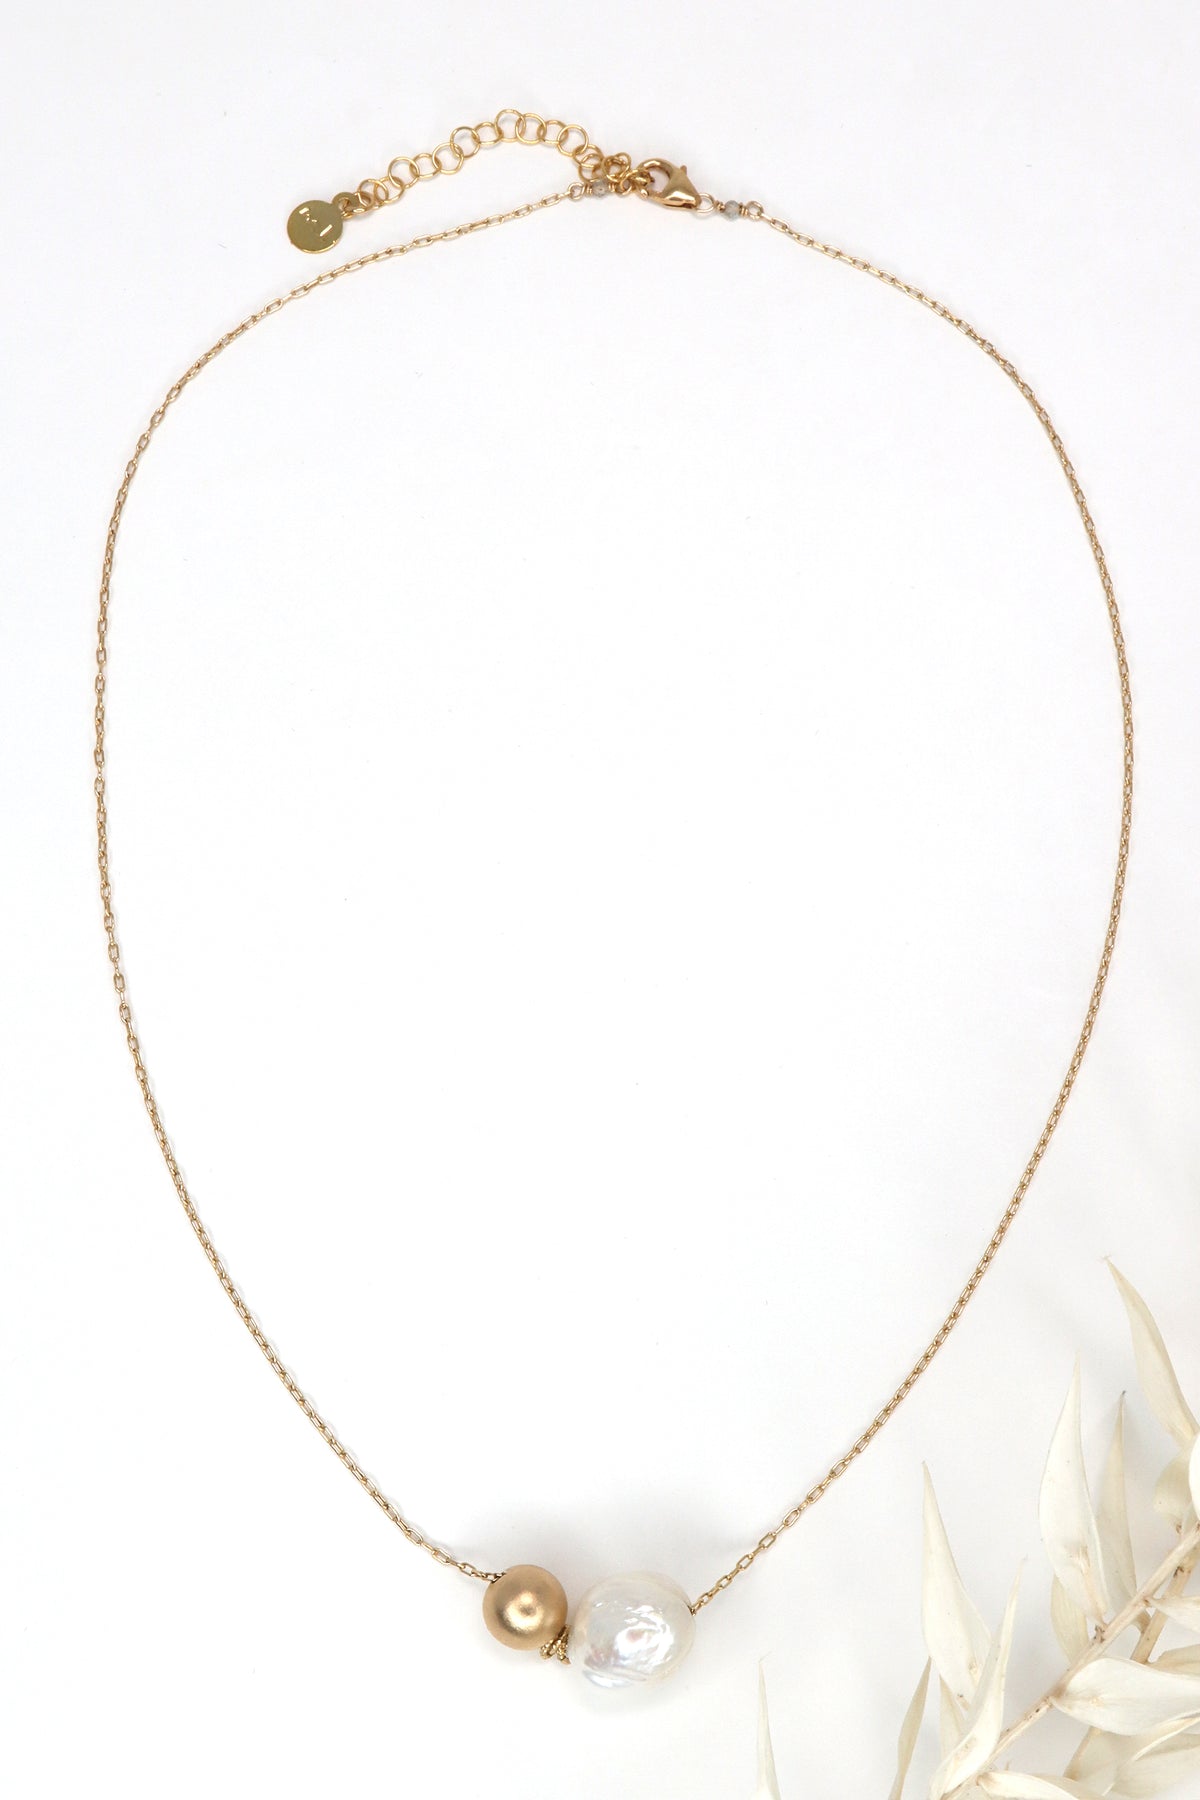 Freshwater Pearl Prana Necklace